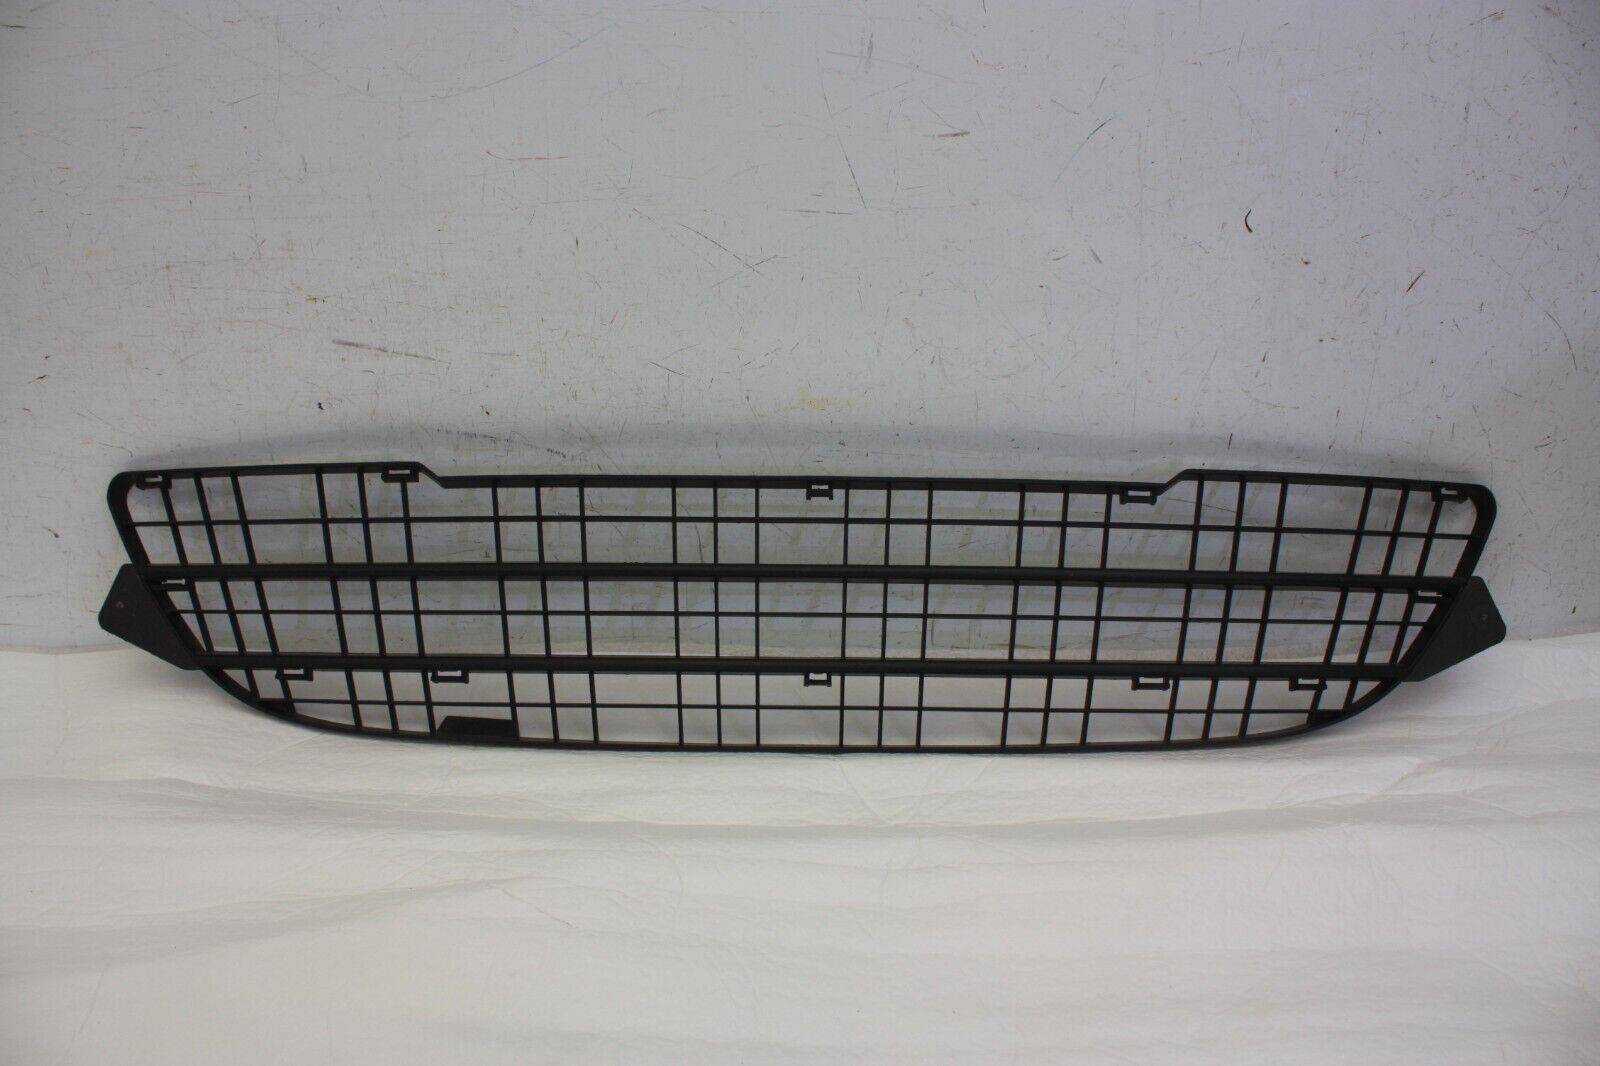 Renault kangoo Front Bumper Grill 2009 to 2013 8200616137 Genuine 176249437180